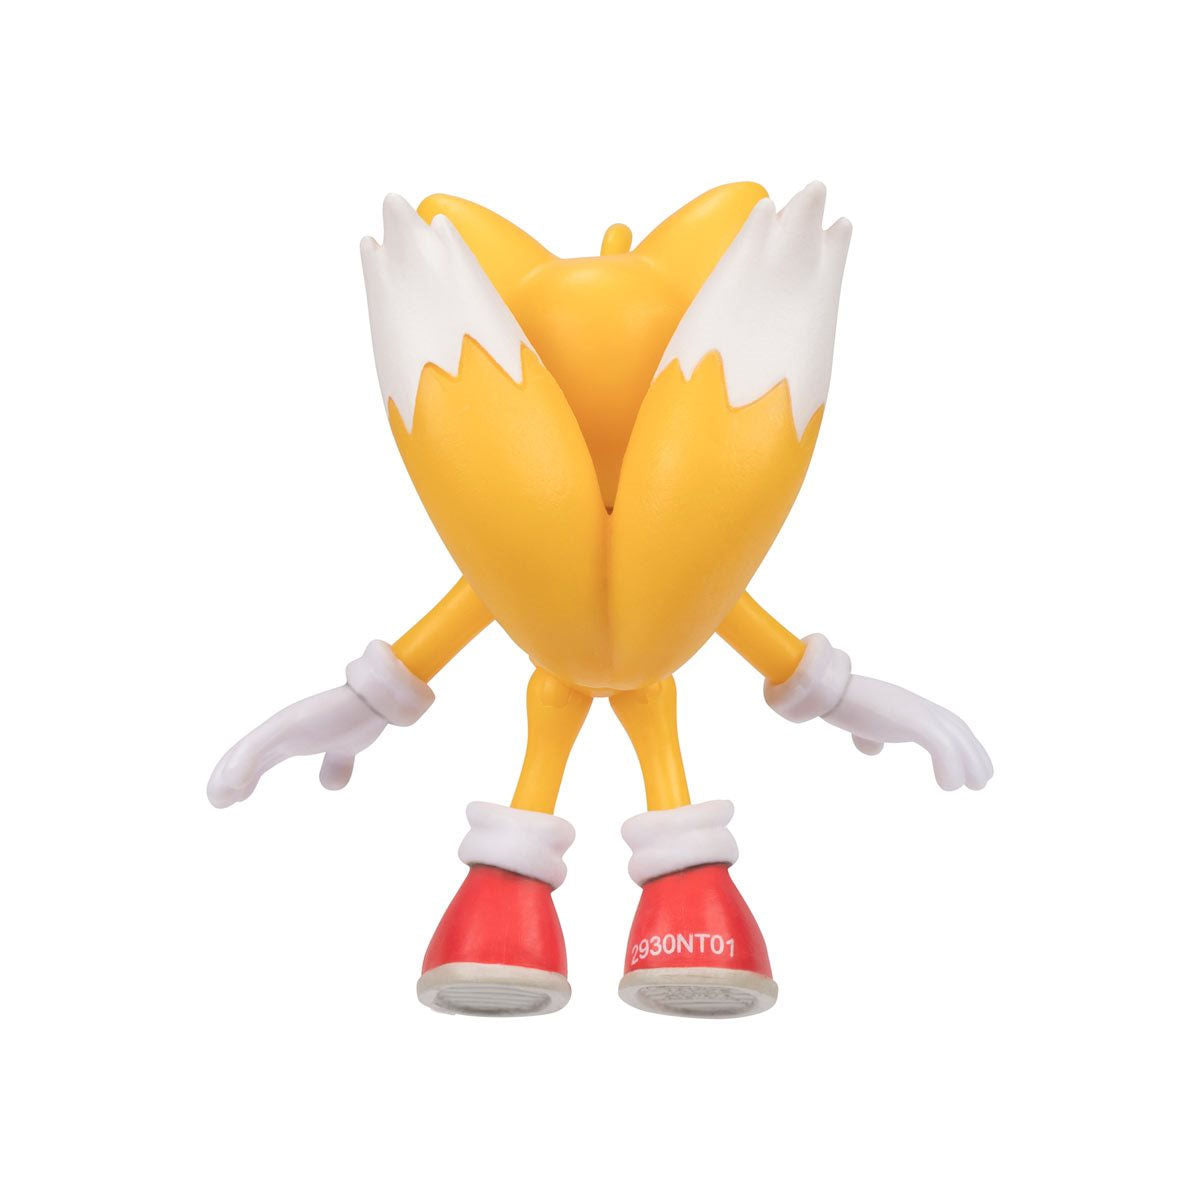  Sonic The Hedgehog 2.5 Classic Tails Action Figure : Toys &  Games